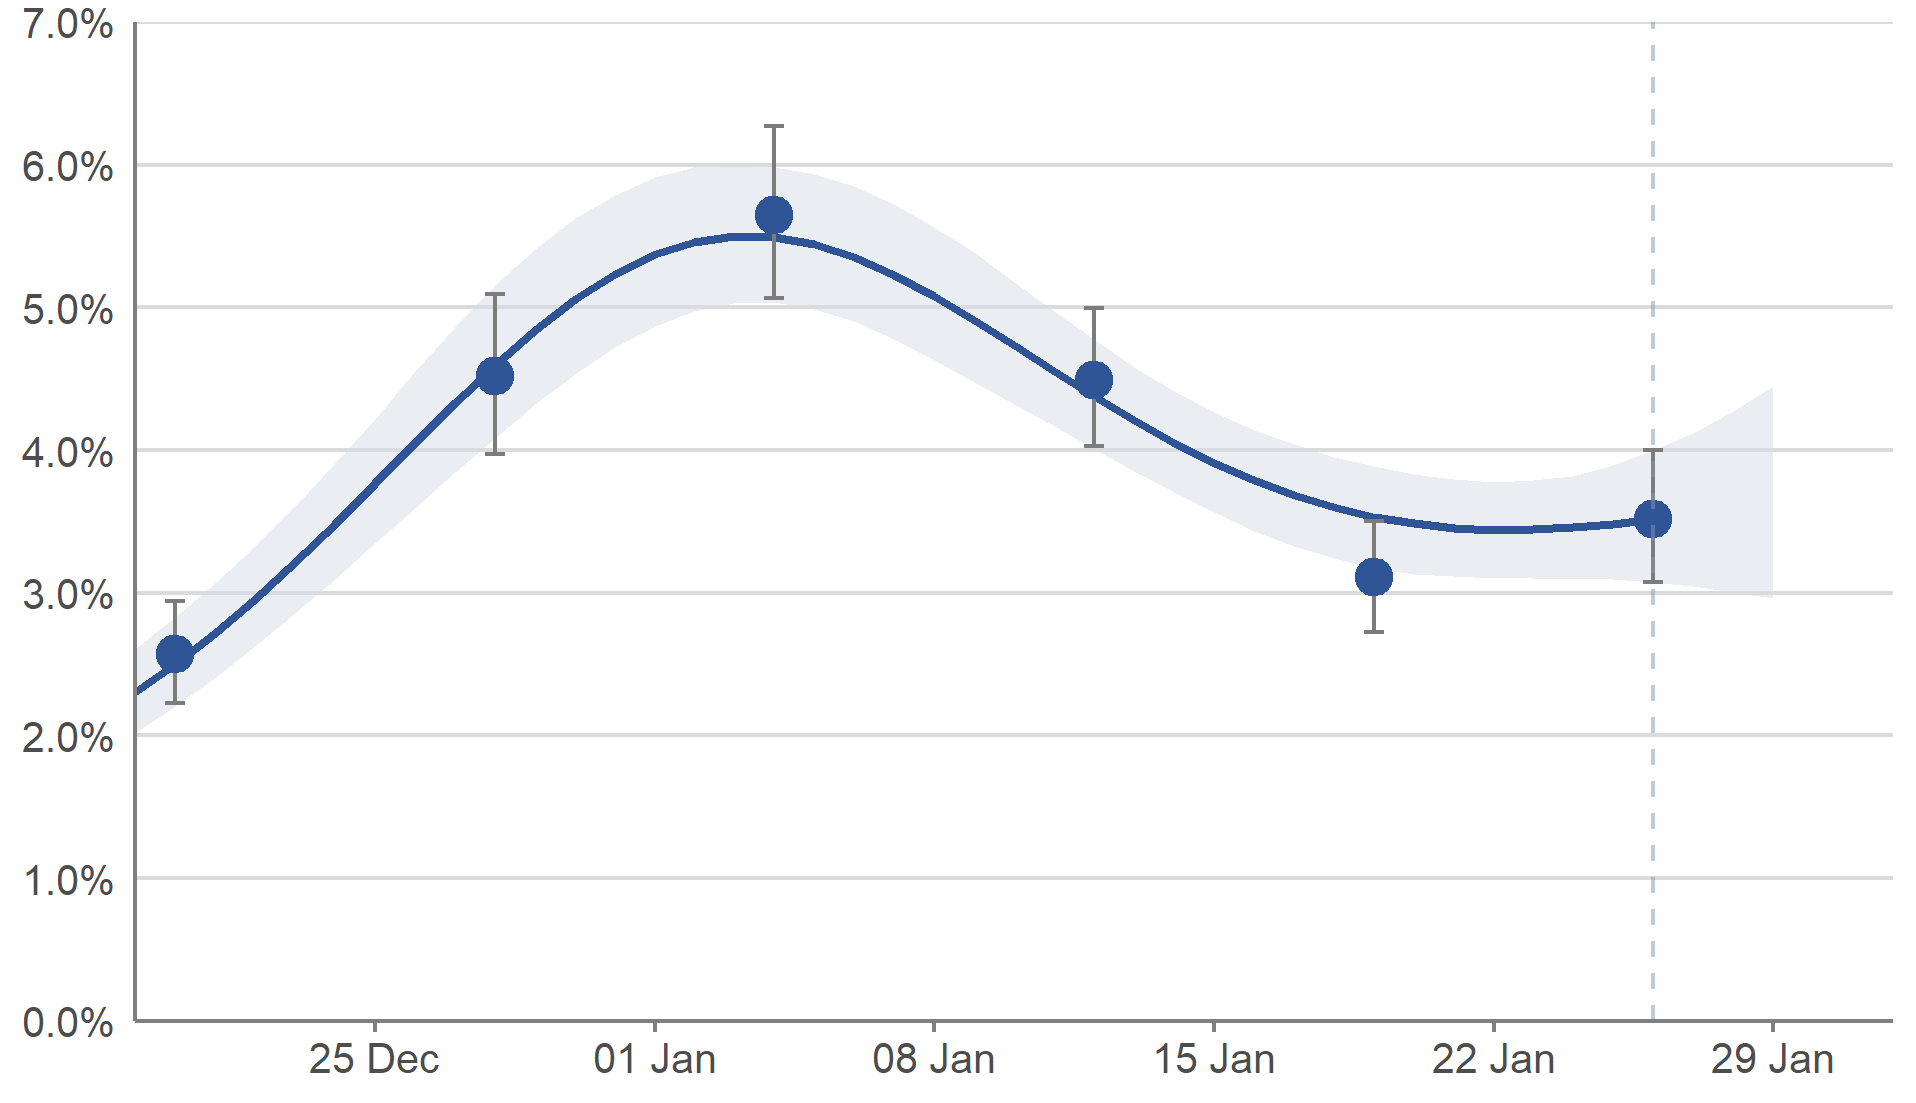 Scotland, the estimated percentage of people testing positive for COVID-19 peaked on 3 January 2022. Estimates then decreased for around two weeks but in the most recent week, the trend is uncertain.